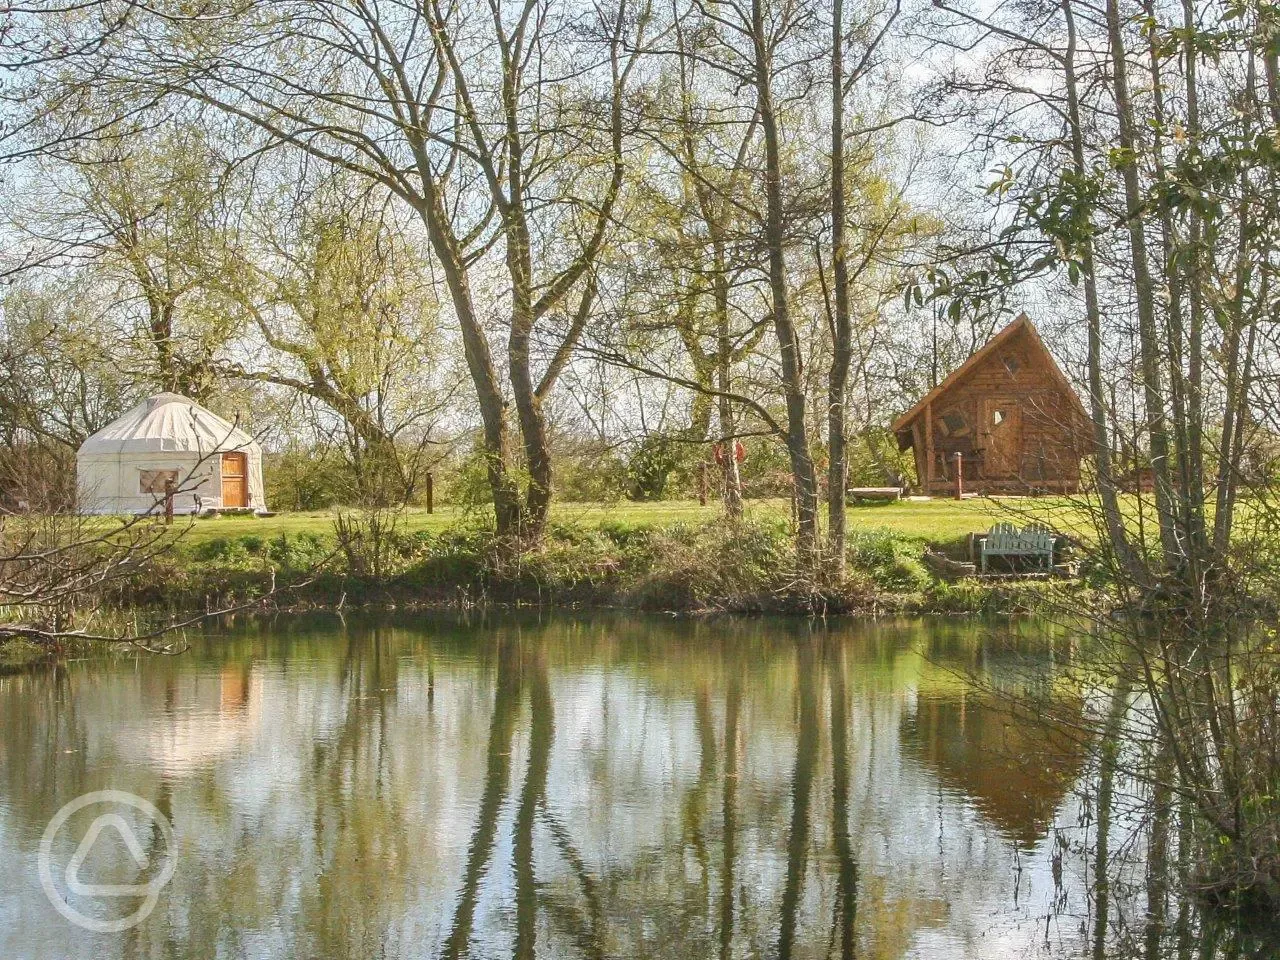 Poppy Yurt and Rose Hollow Log Cabin by the lake